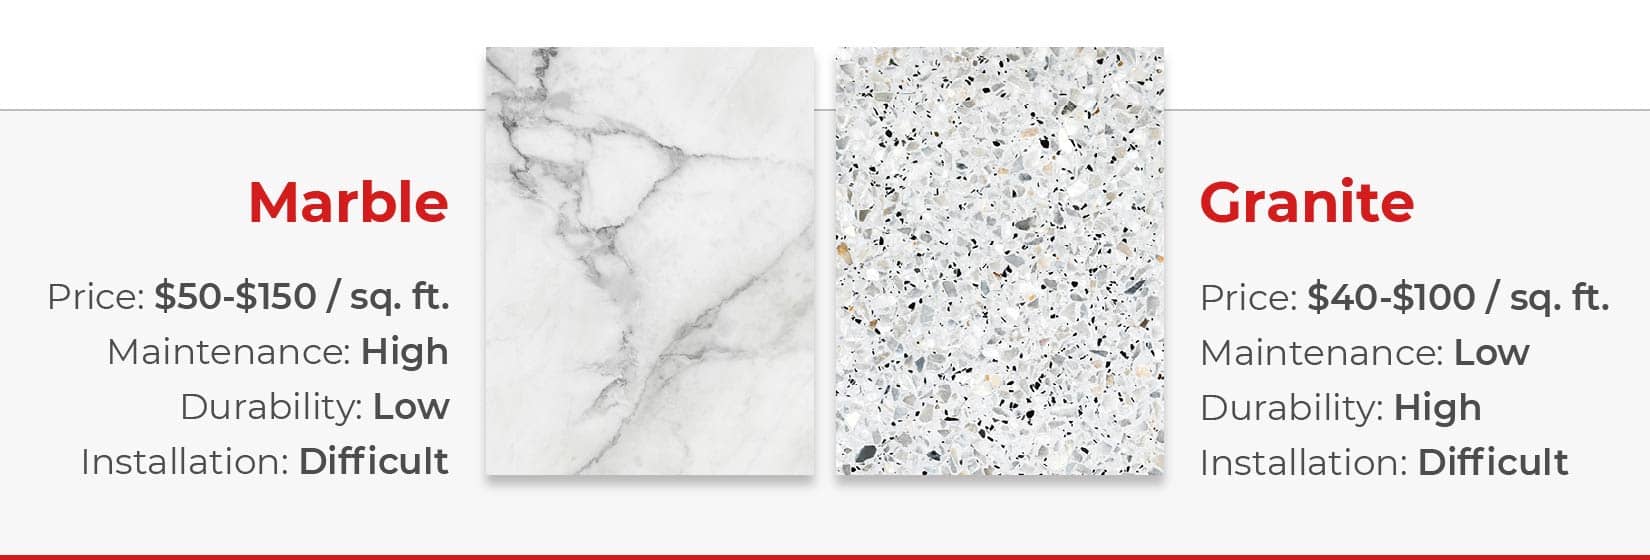 Side-by-side comparison of marble vs. granite.